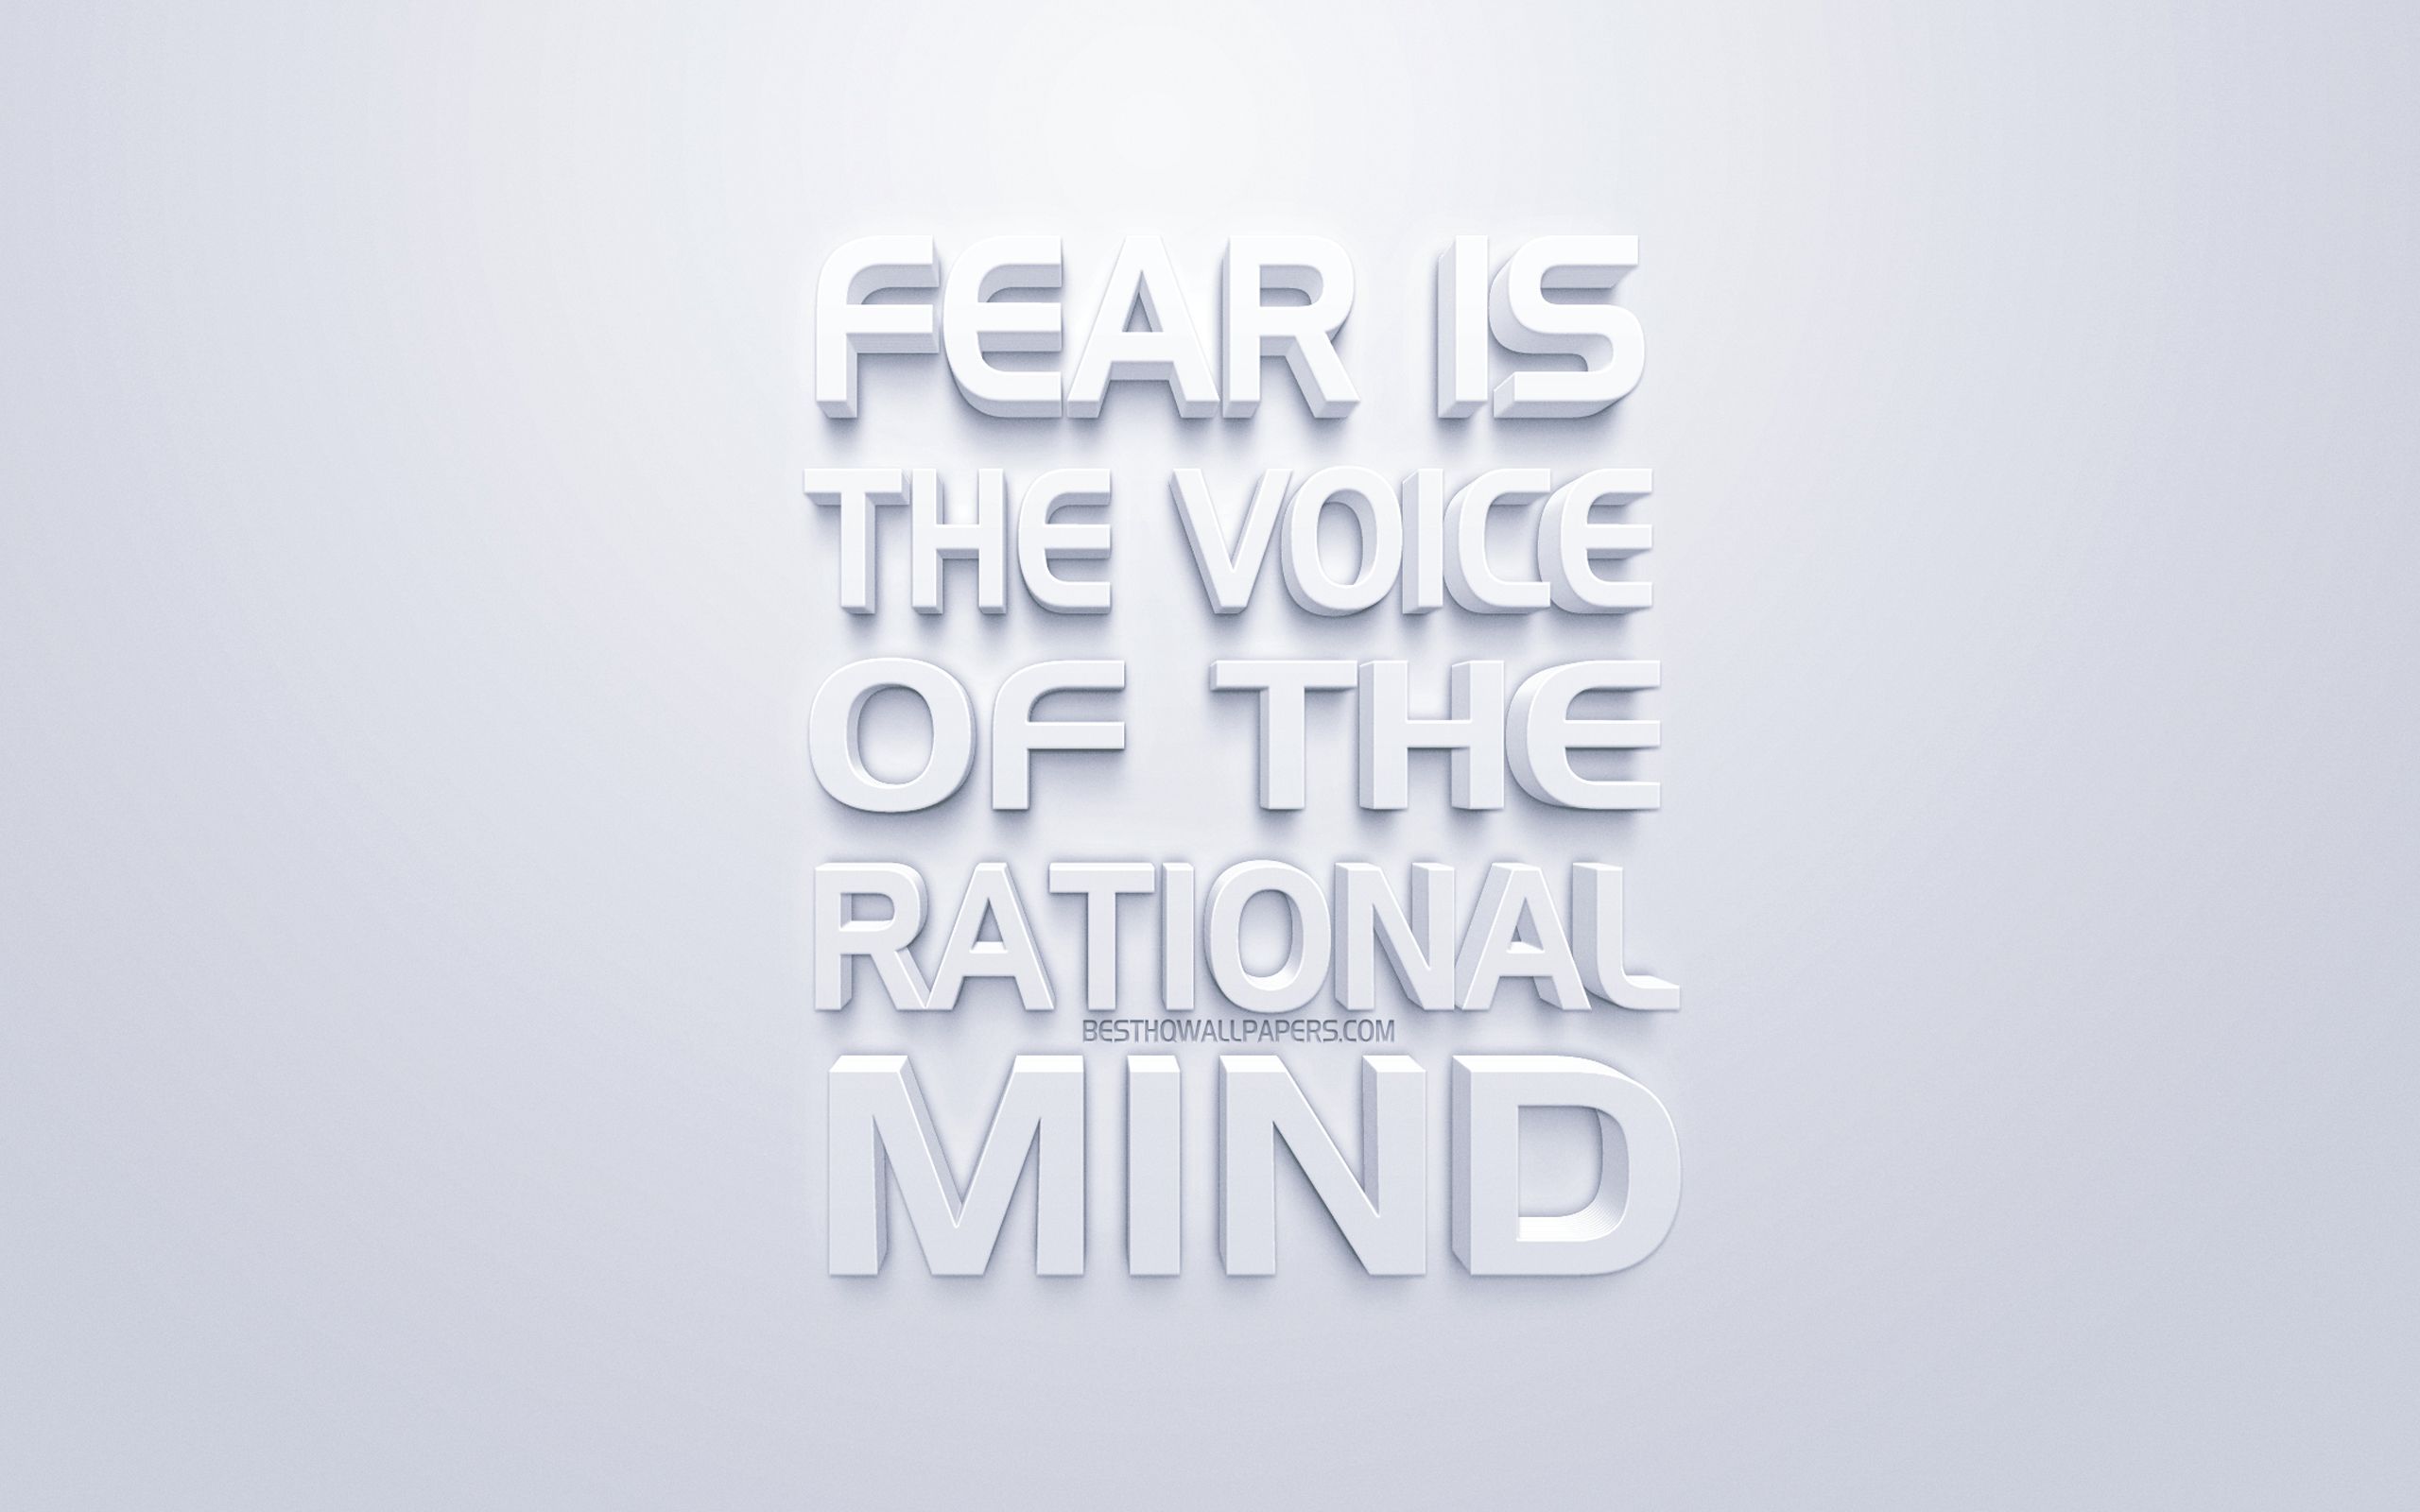 Download wallpaper Fear is the voice of the rational mind, quotes about fear, white 3D art, popular quotes, white background, inspiration quotes for desktop with resolution 2560x1600. High Quality HD picture wallpaper